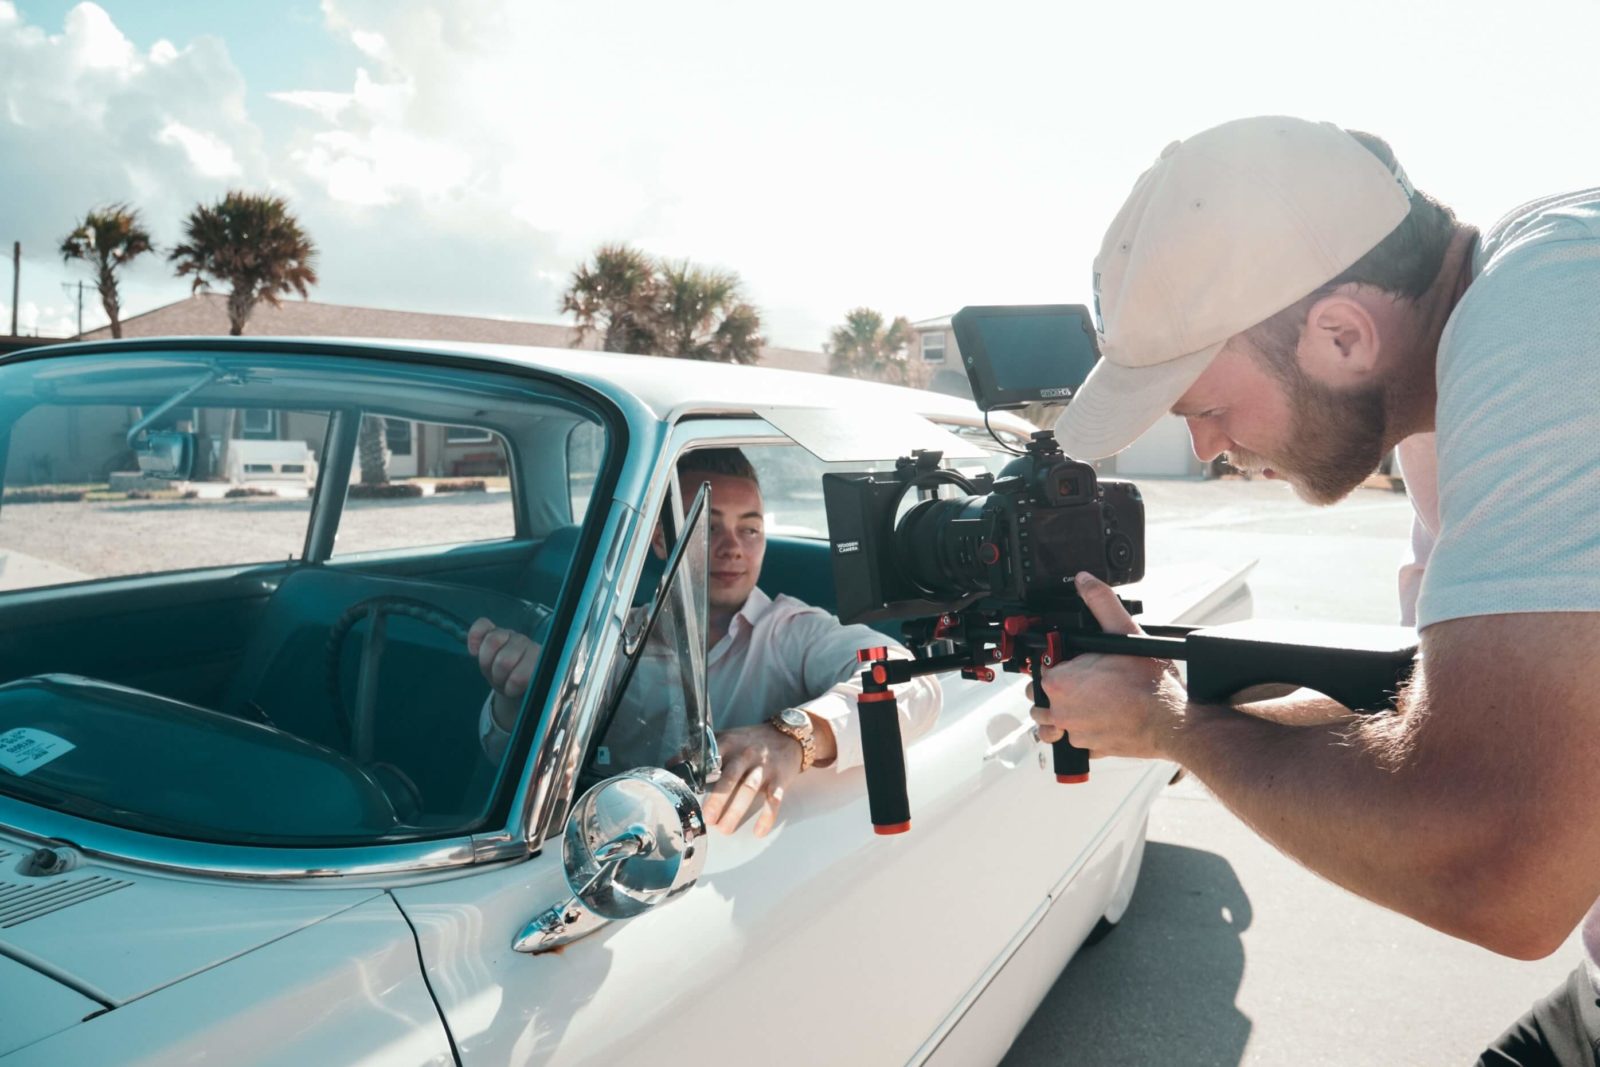 How to Use Your Dealership’s Videos Across All Marketing Channels